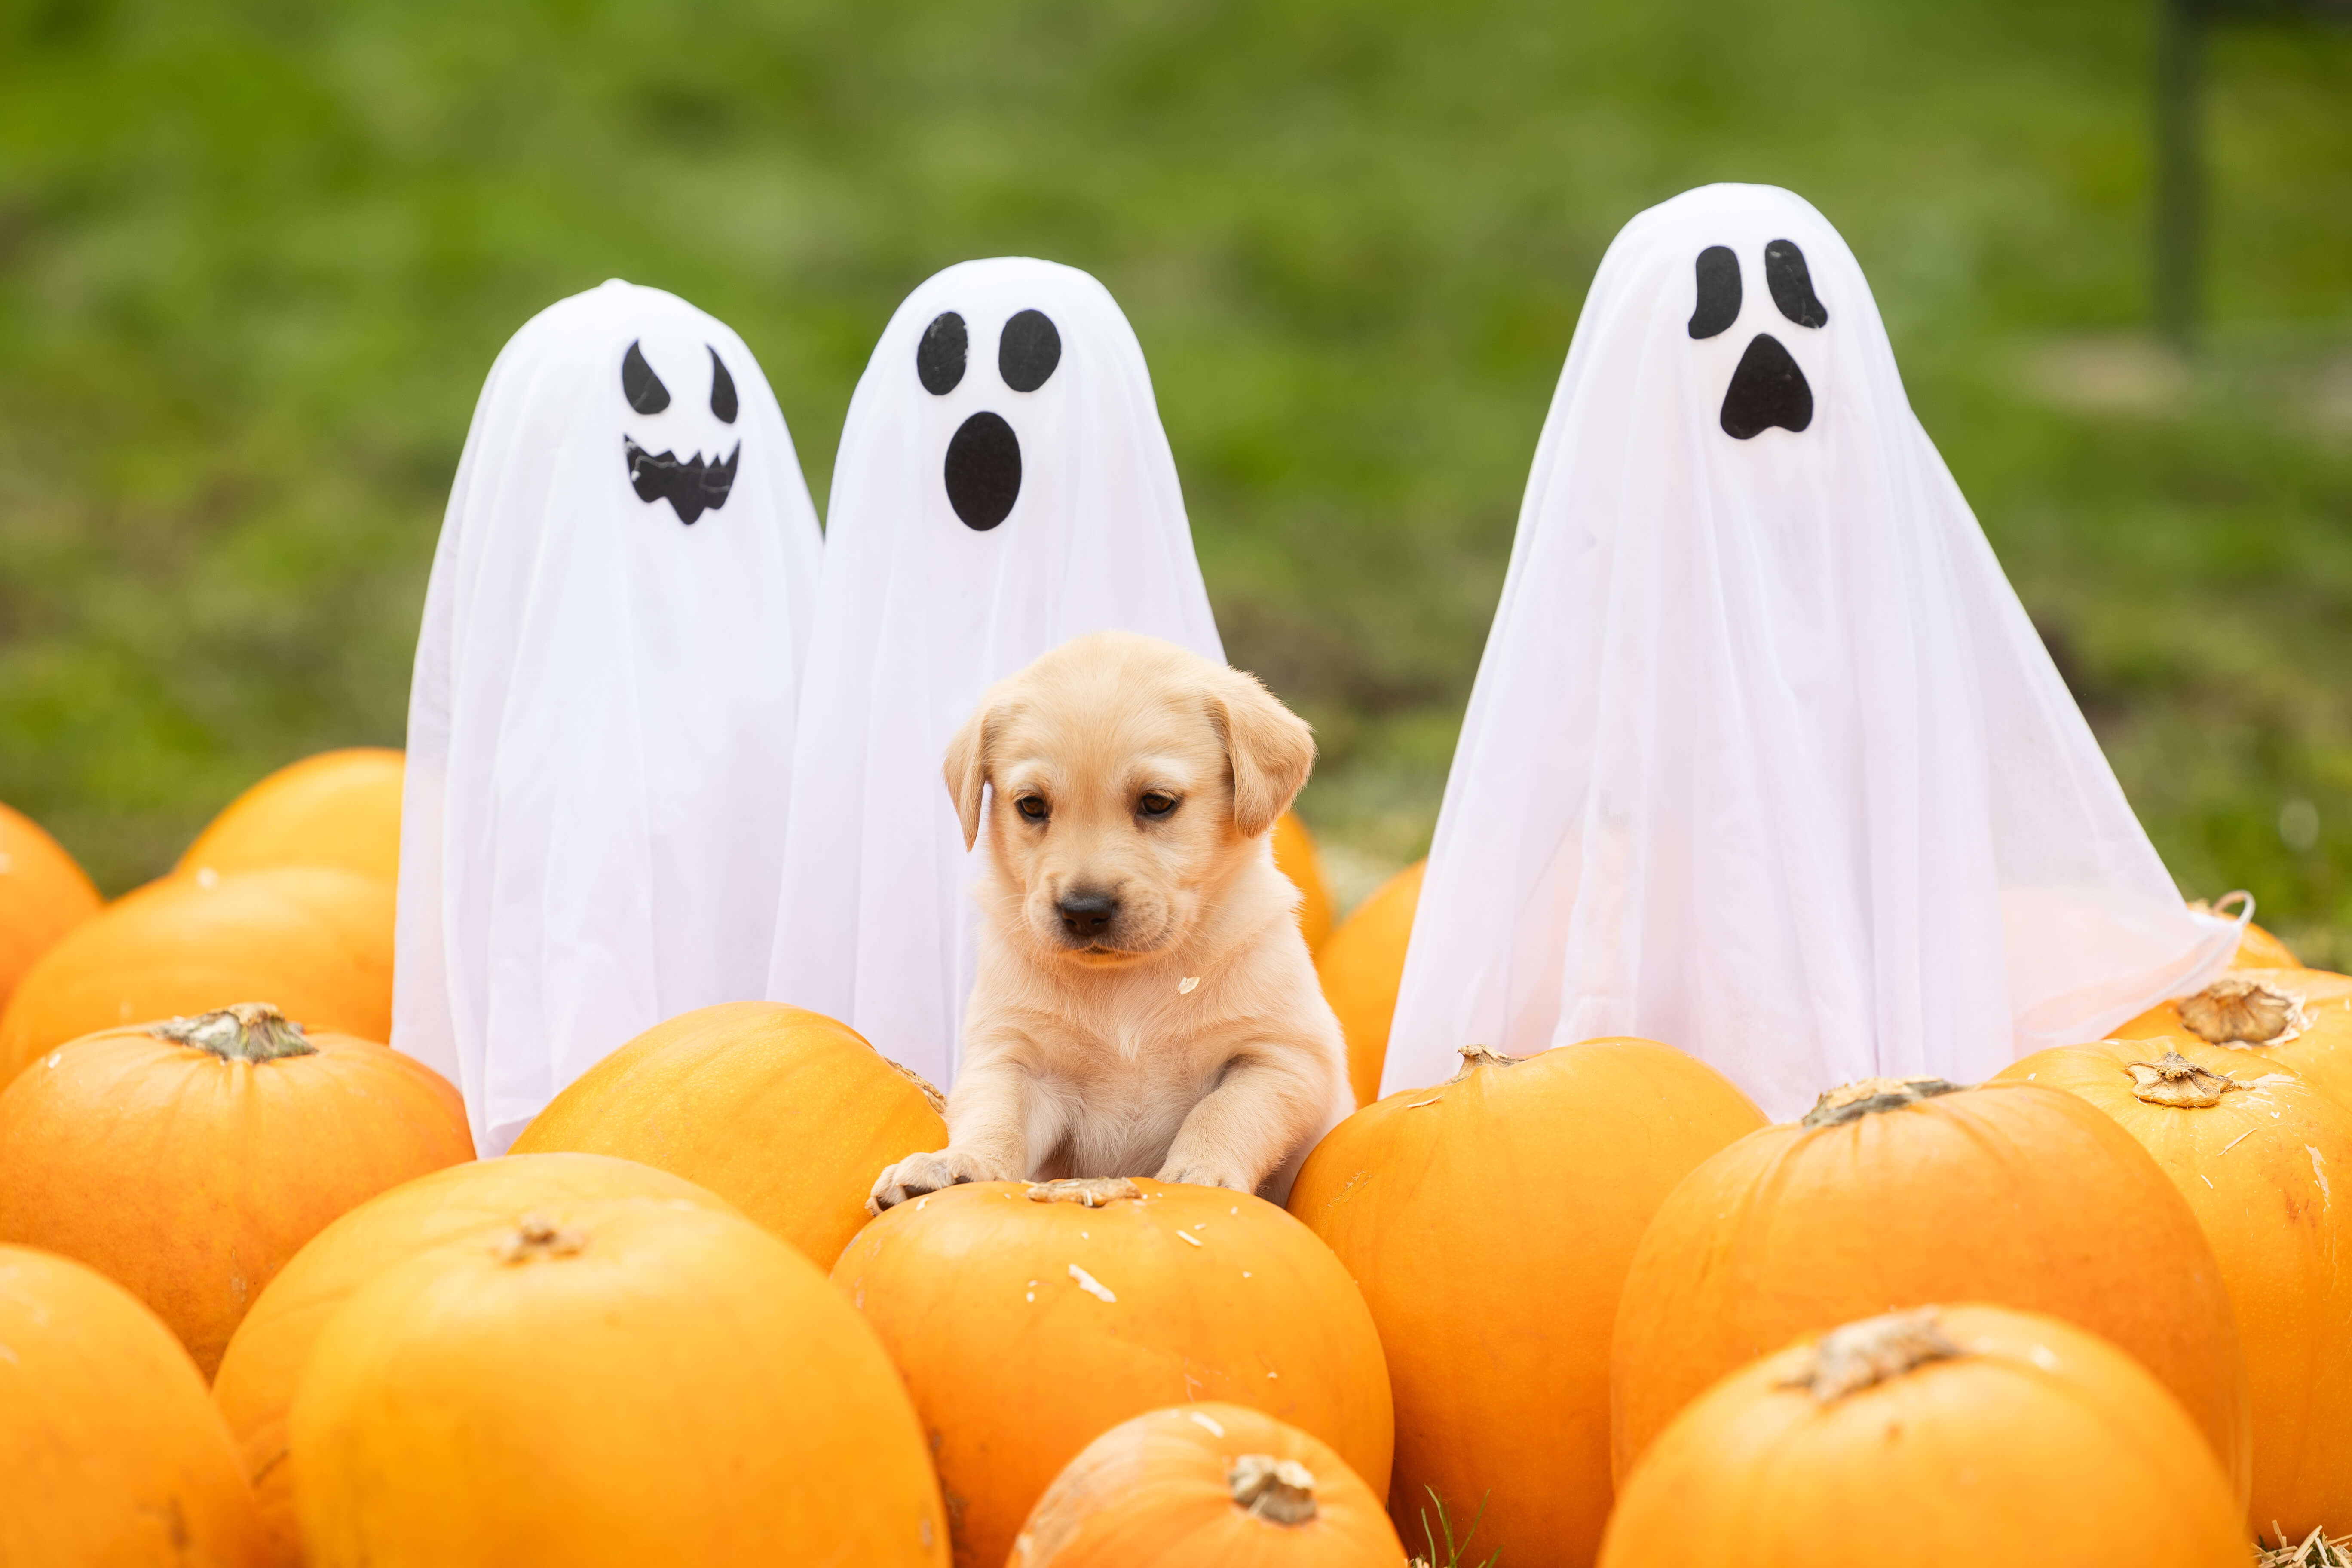 A five-week-old yellow Labrador puppy sits surrounded by pumpkins with three white ghost decorations. in the background.